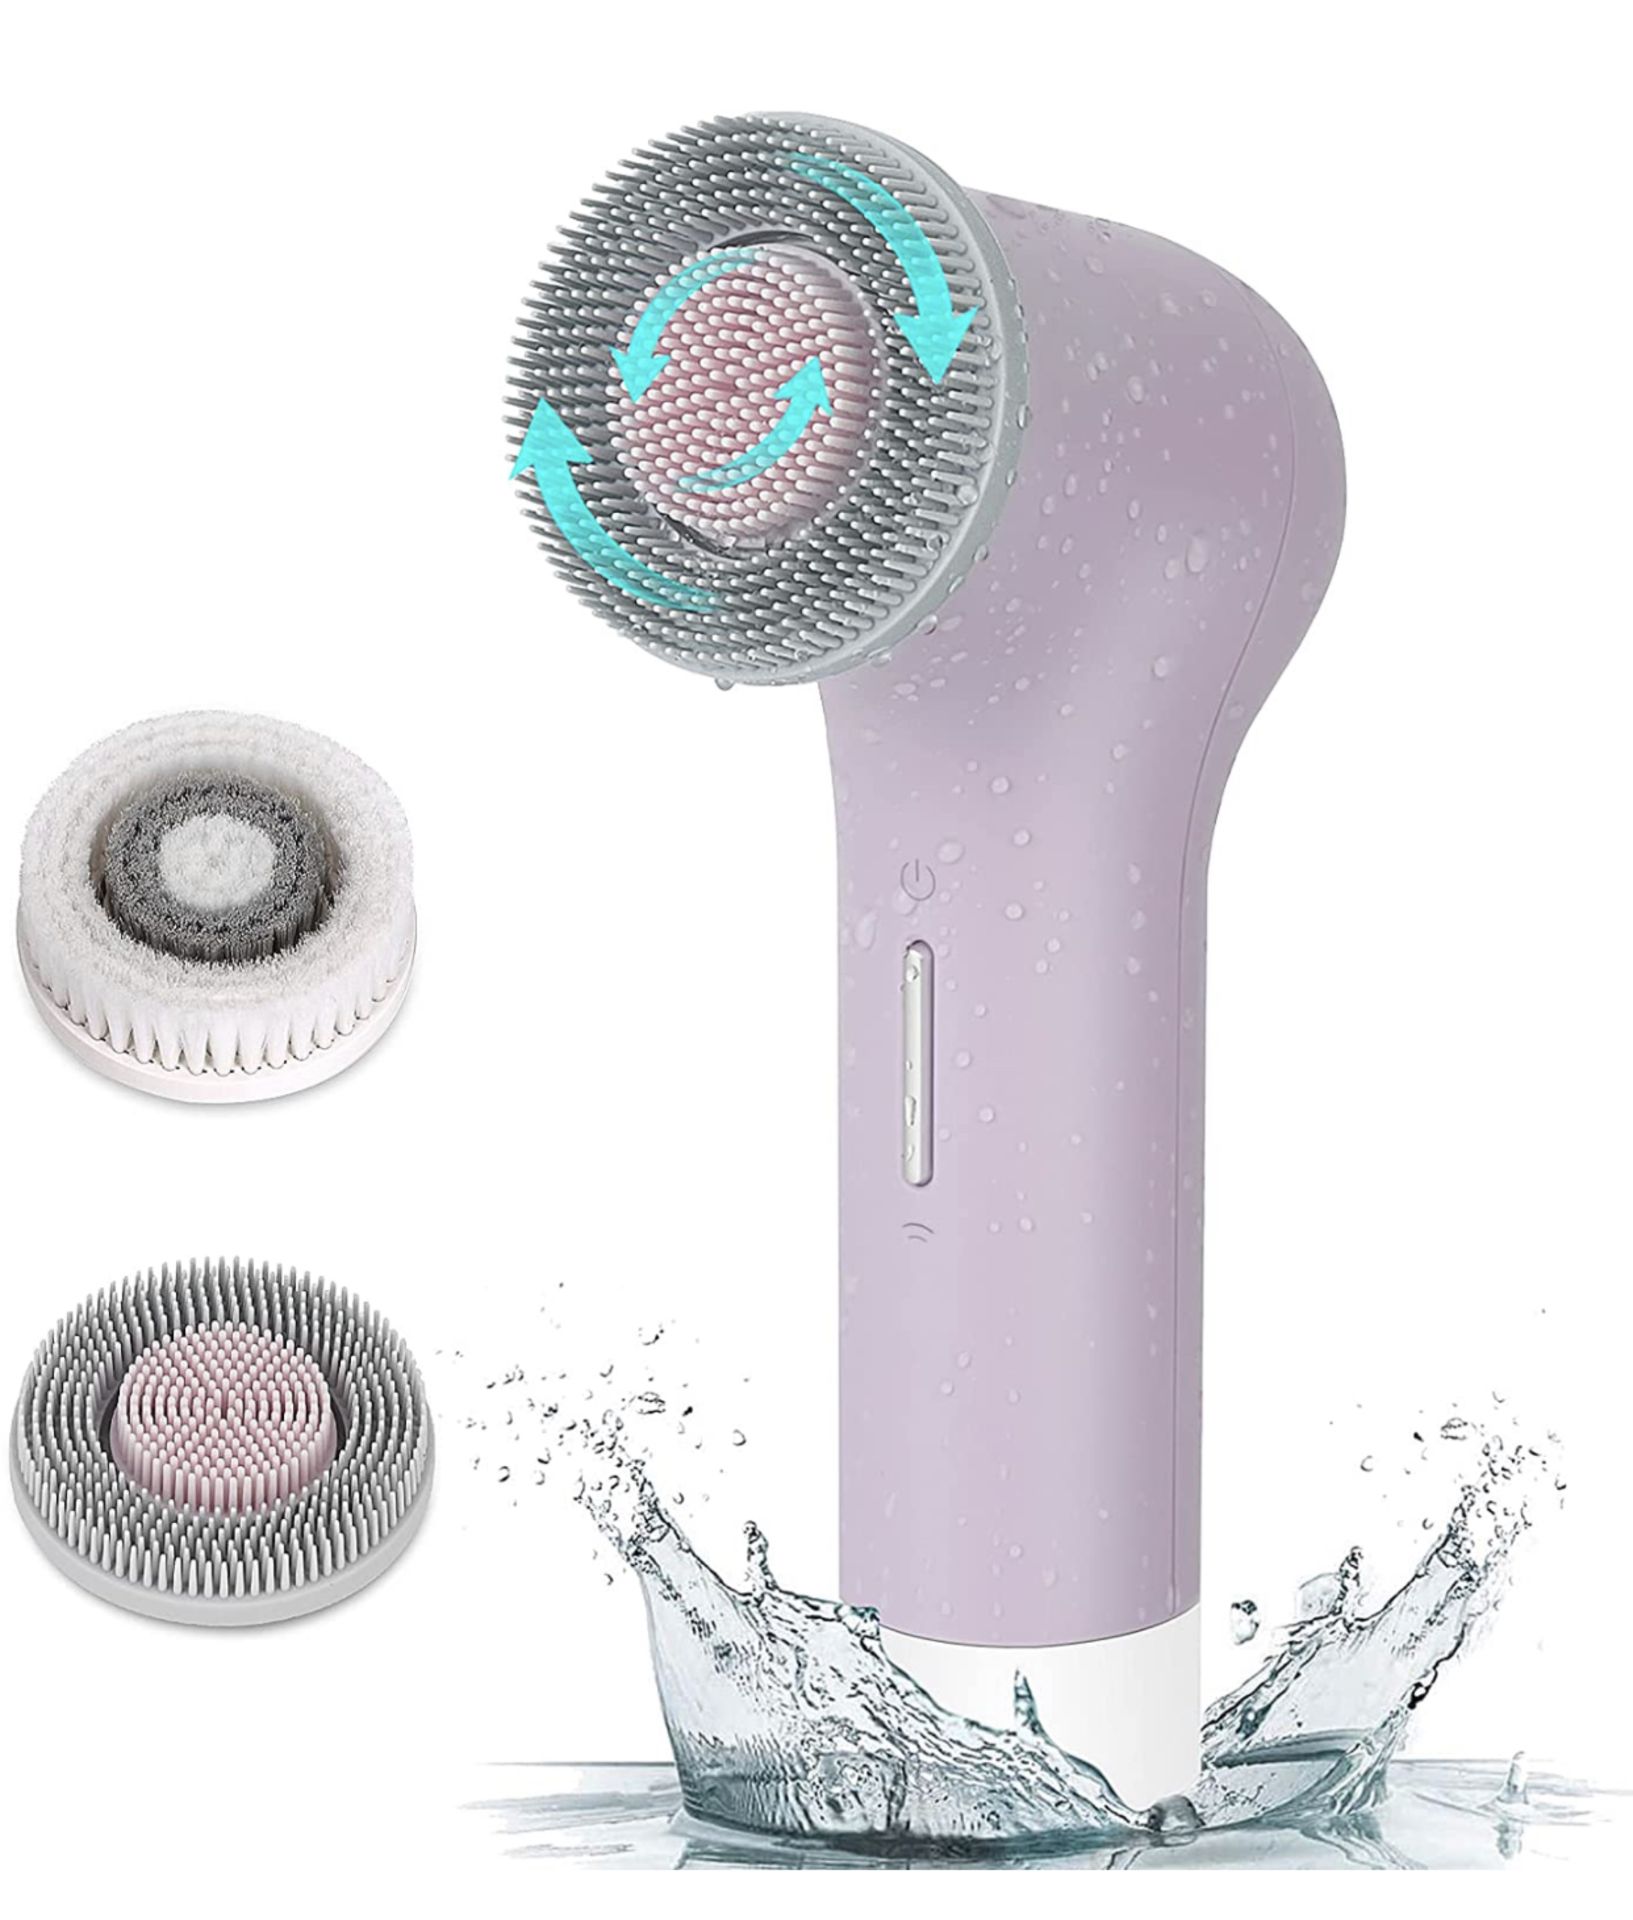 MyCarbon Facial Cleansing Brush IPX7 Waterproof Electric Facial Brush